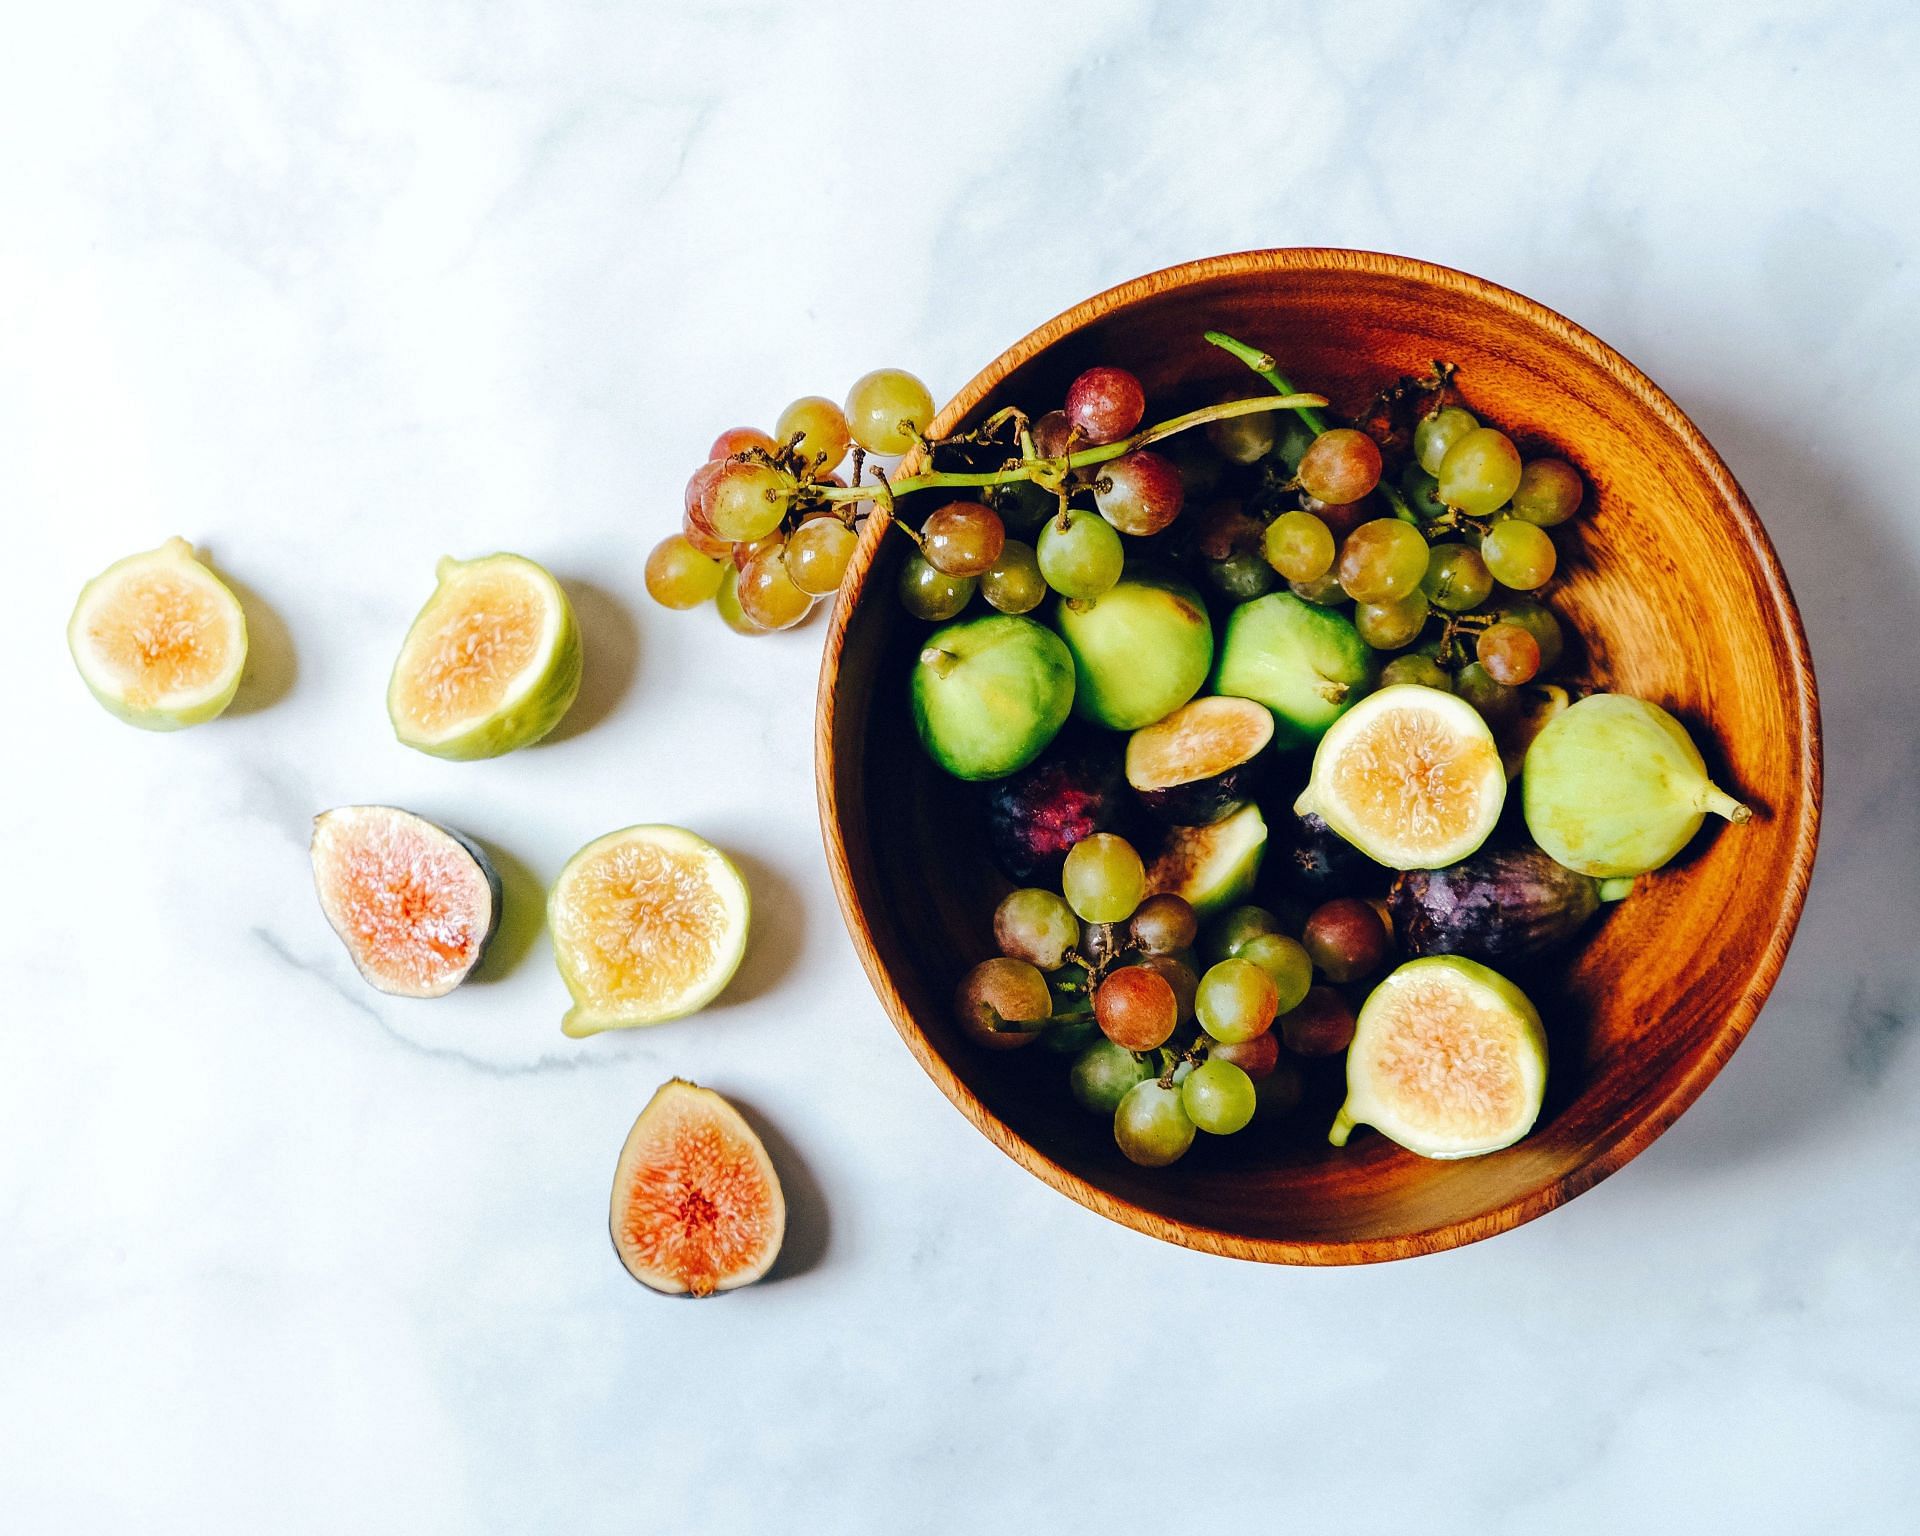 7 sweet and compelling reasons that make figs good for you. (Image via Pexels/Ella Olsson)